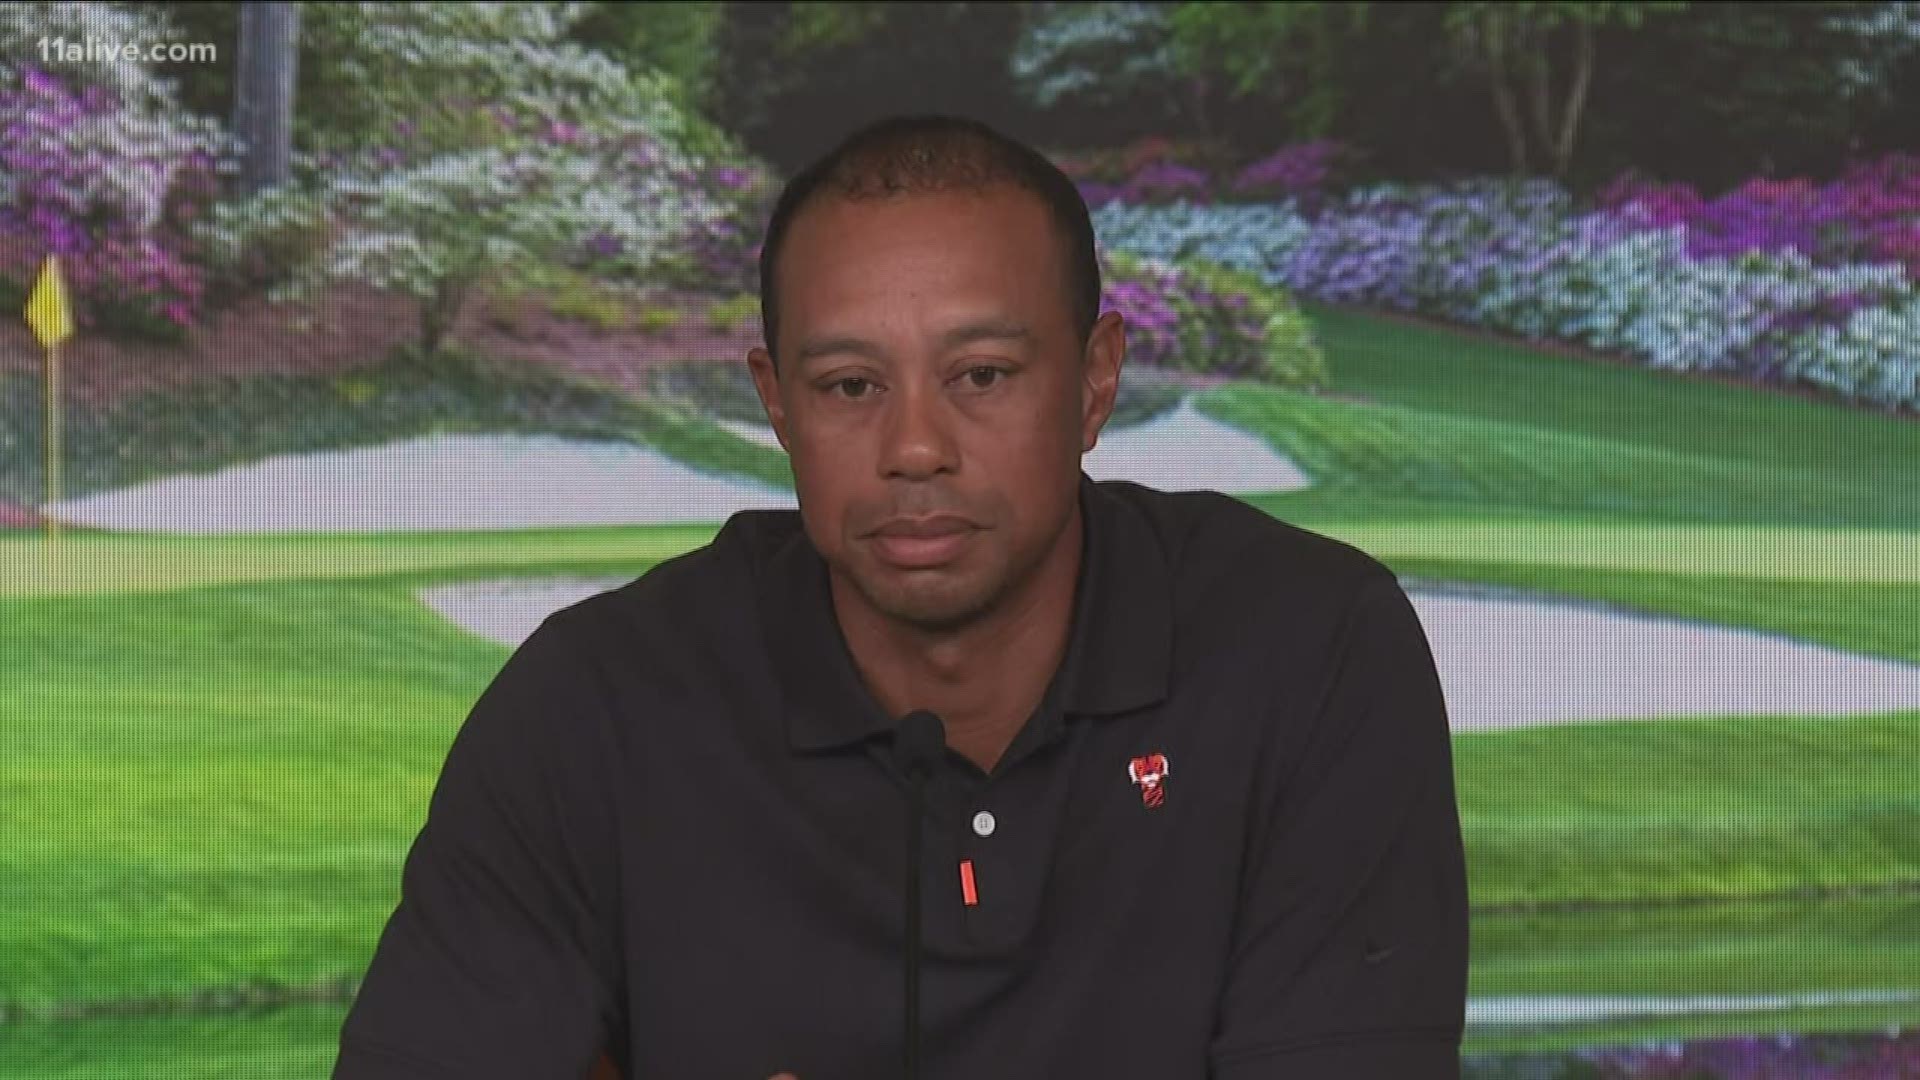 Tiger Woods escapes major injury - by avoiding his own security detail at Masters | 11alive.com